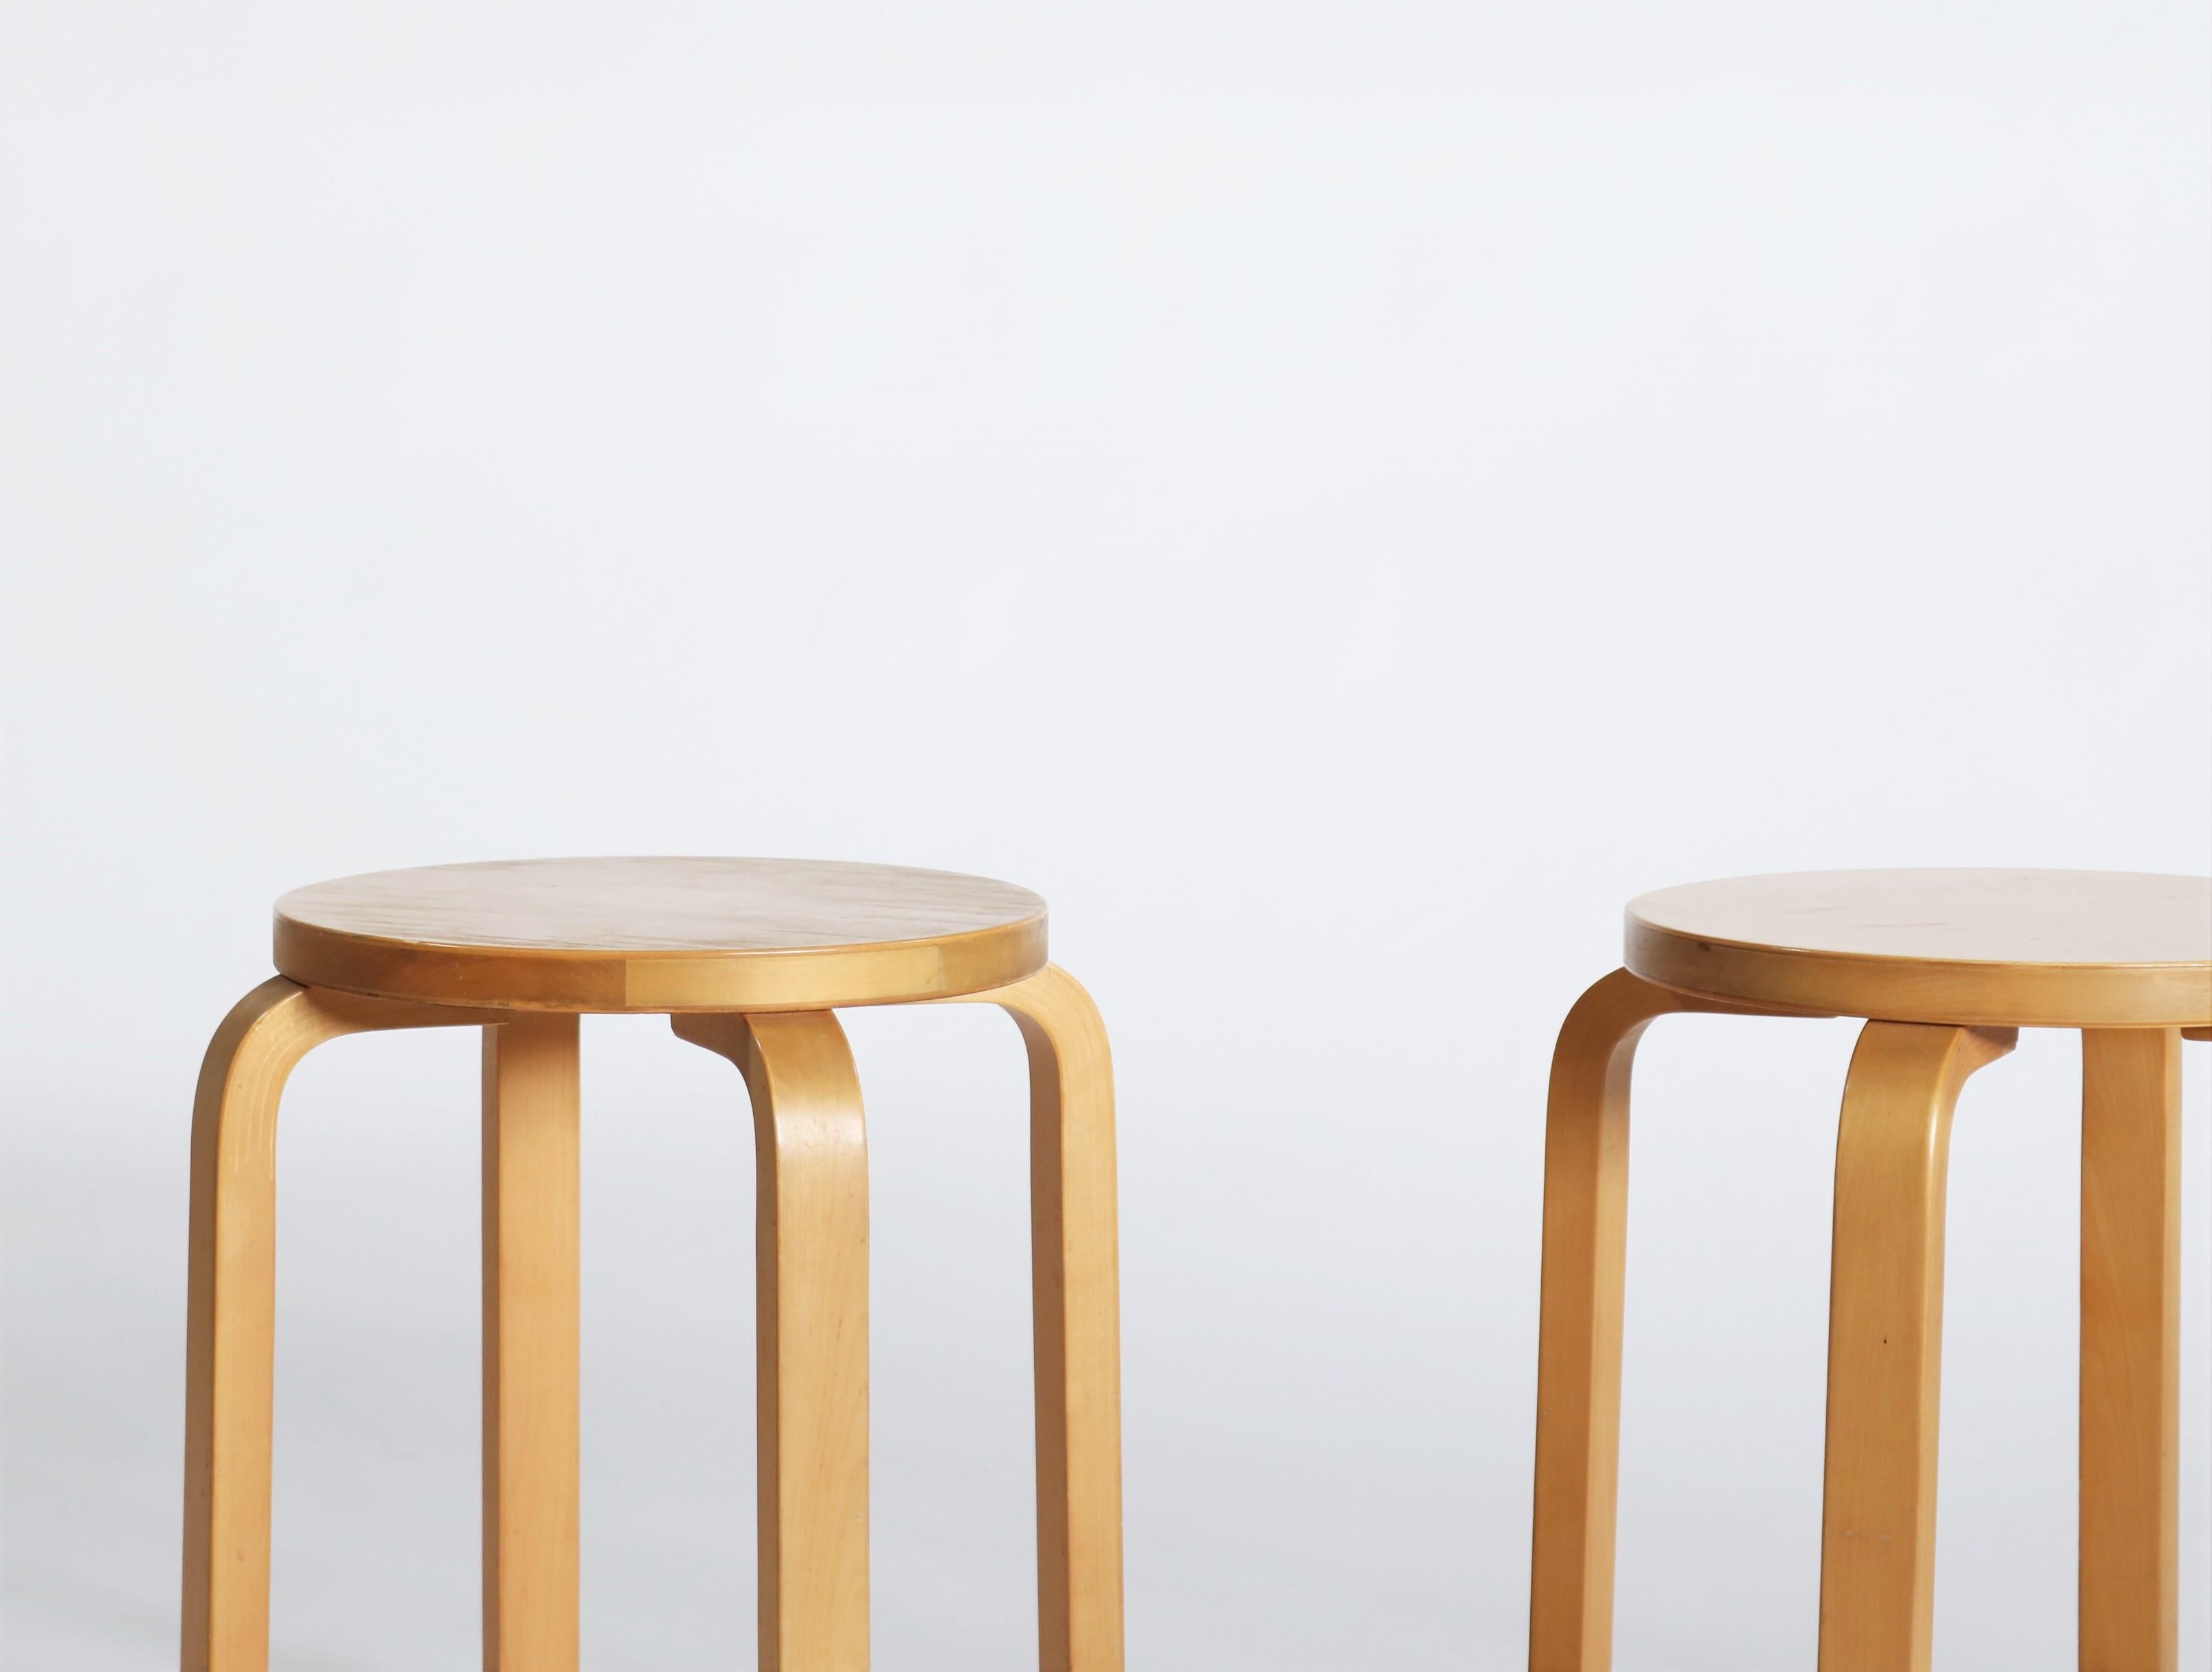 Pair of beautifully patinated stools from the early Artek production. Alvar Aalto’s four-legged stool E60 designed in 1934 is the most elemental of furniture pieces, equally suitable as a seat, table, storage unit, or display surface. Projecting a